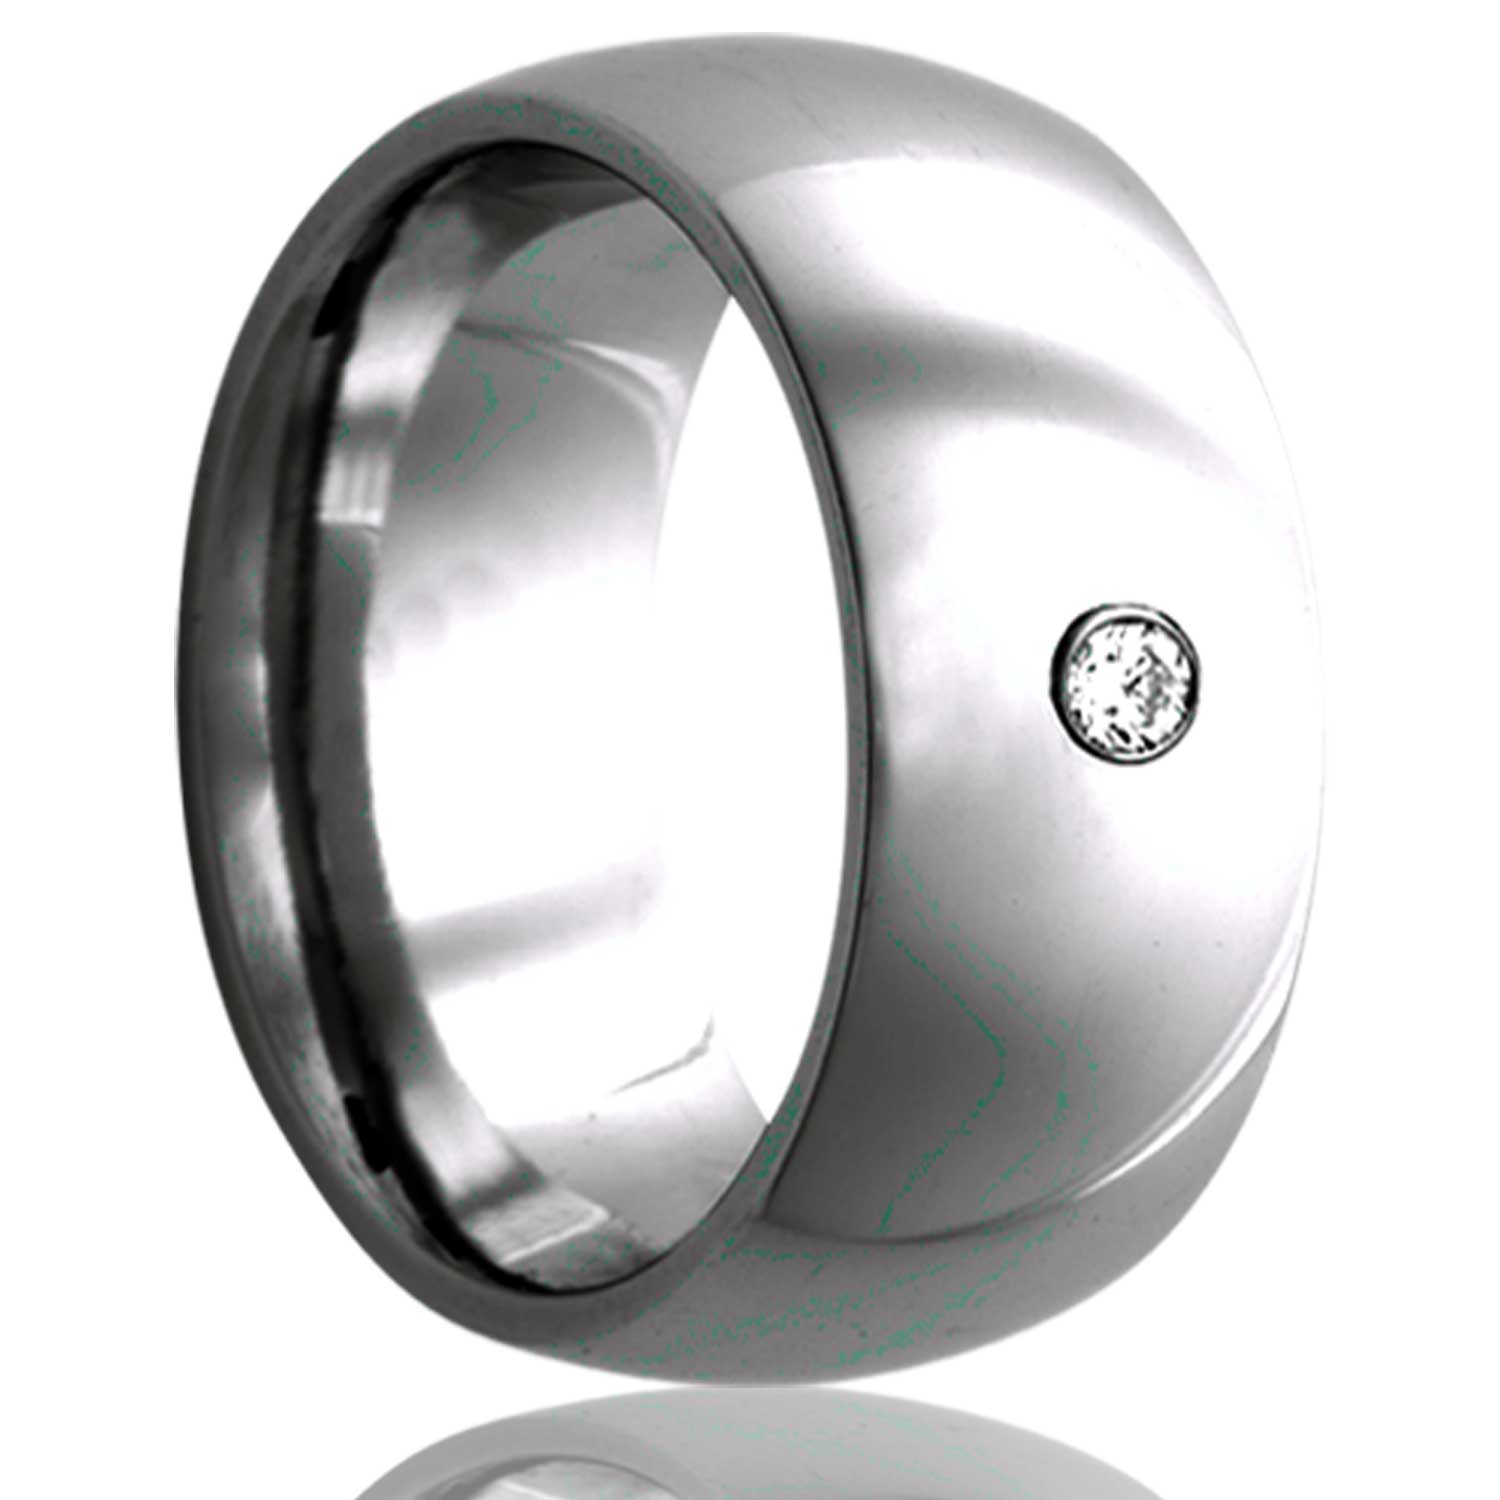 A domed cobalt wedding band with diamond displayed on a neutral white background.